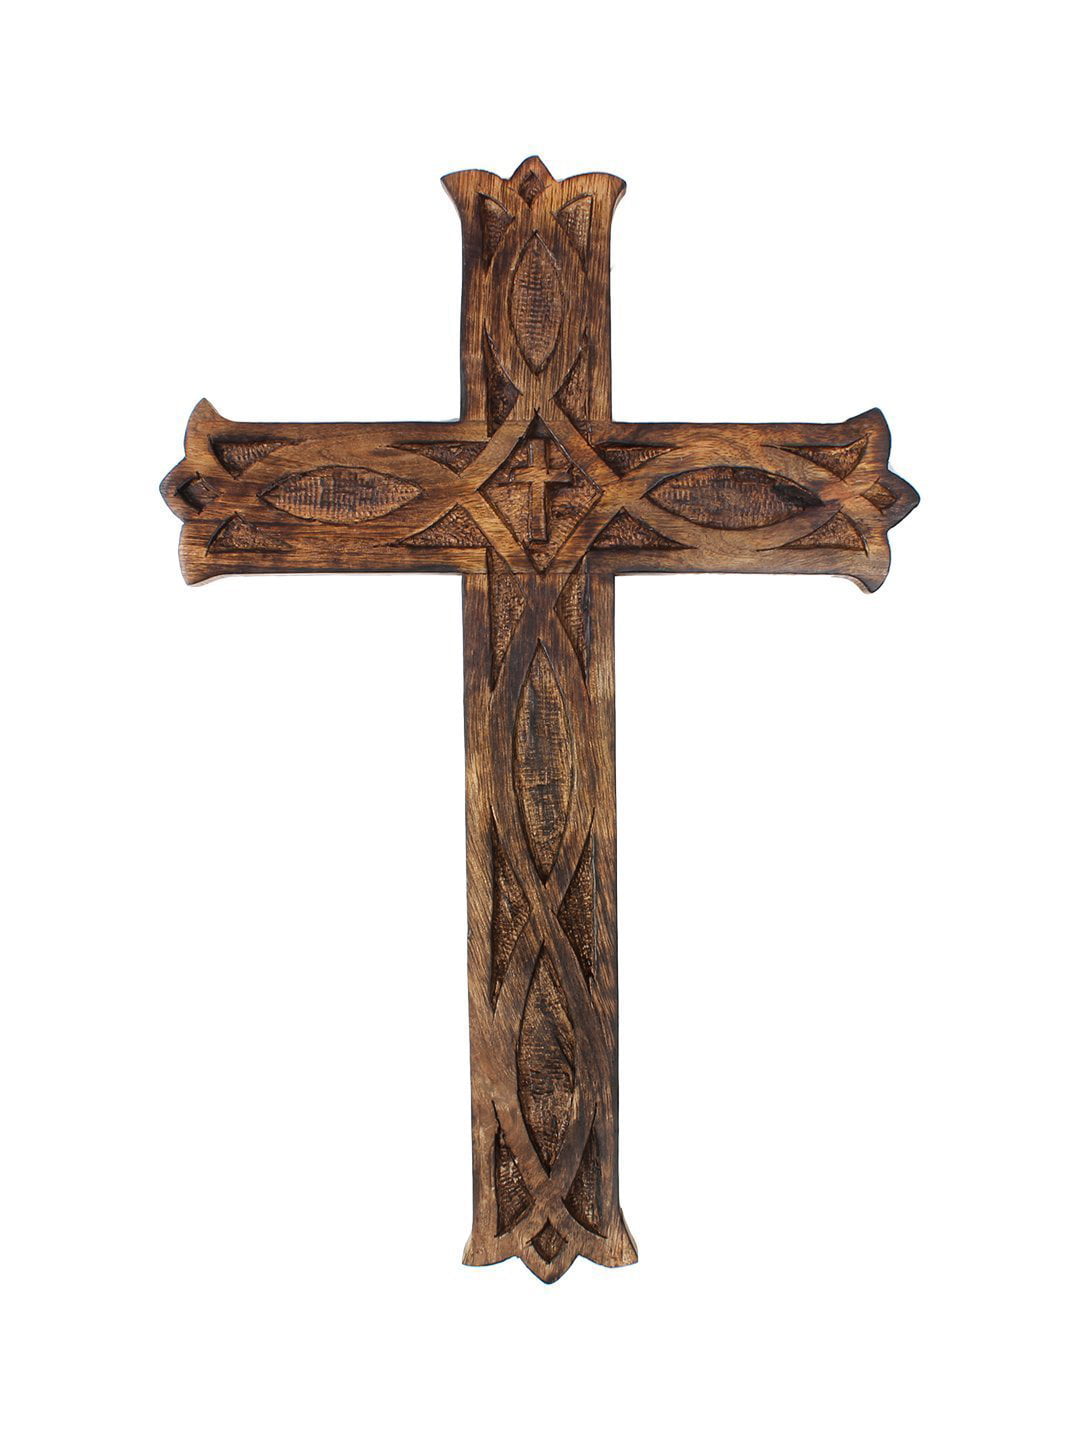 Wooden Religious Catholic Crucifix Cross Wall Hanging 18 x 12 Inches French Plaque Floral Carvings Living Room Home Decor Accent Church Chapel Altar Wall Art Decor Display Antiqued Rustic Finish 